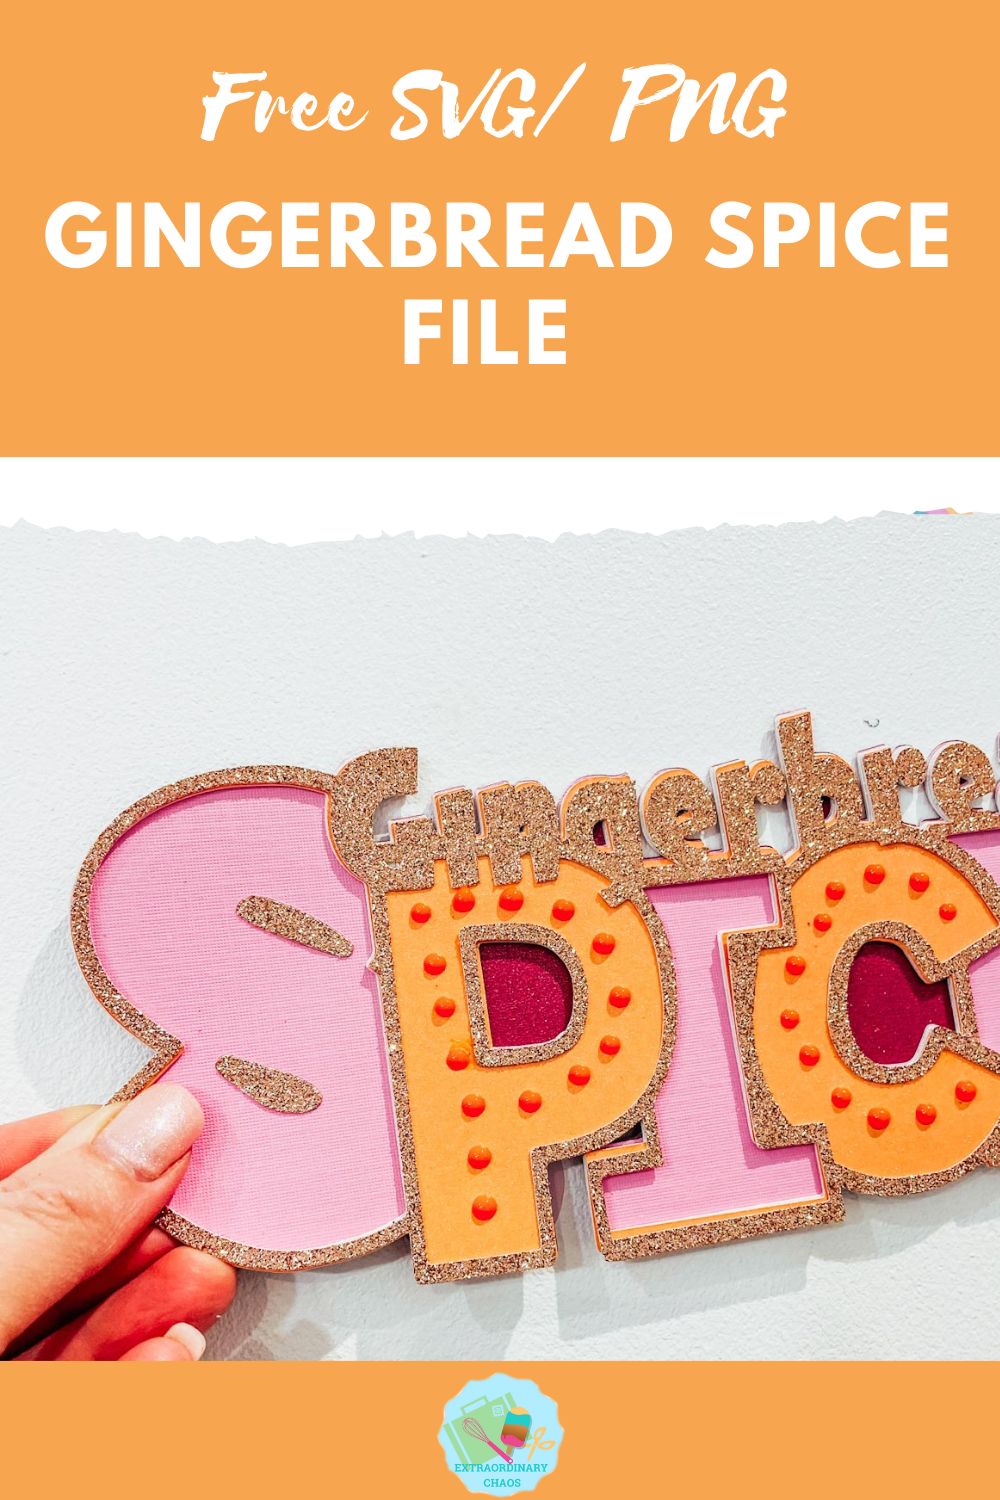 Free Layered Gingerbread Spice SVGPNG File for Cricut, Glowforge